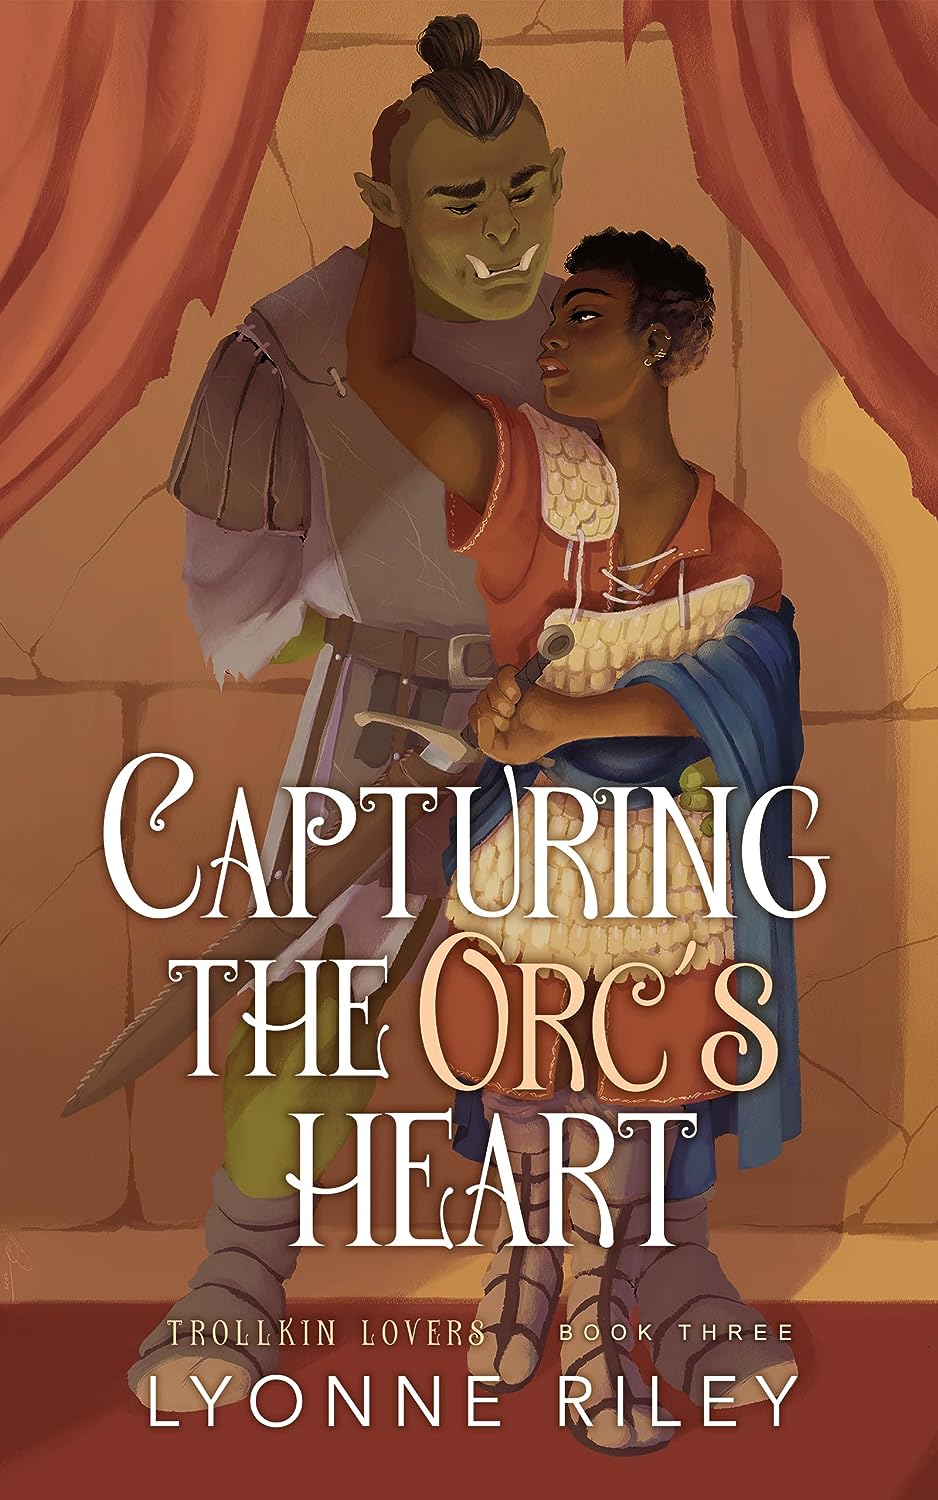 Capturing the Orc’s Heart by Lyonne Riley